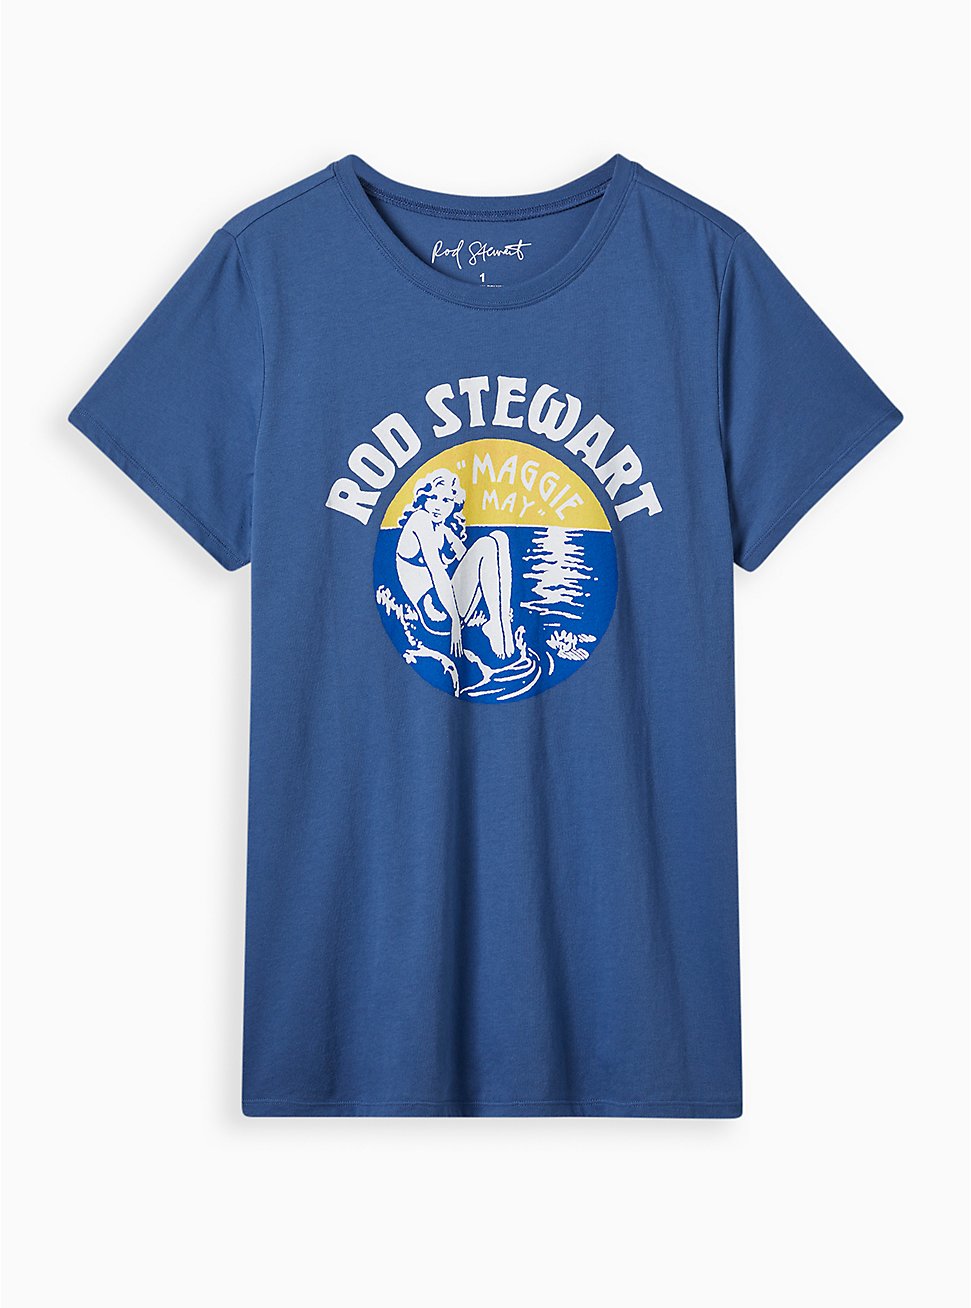 Rod Stewart Classic Crew - Cotton Maggie May Blue, BLUE, hi-res